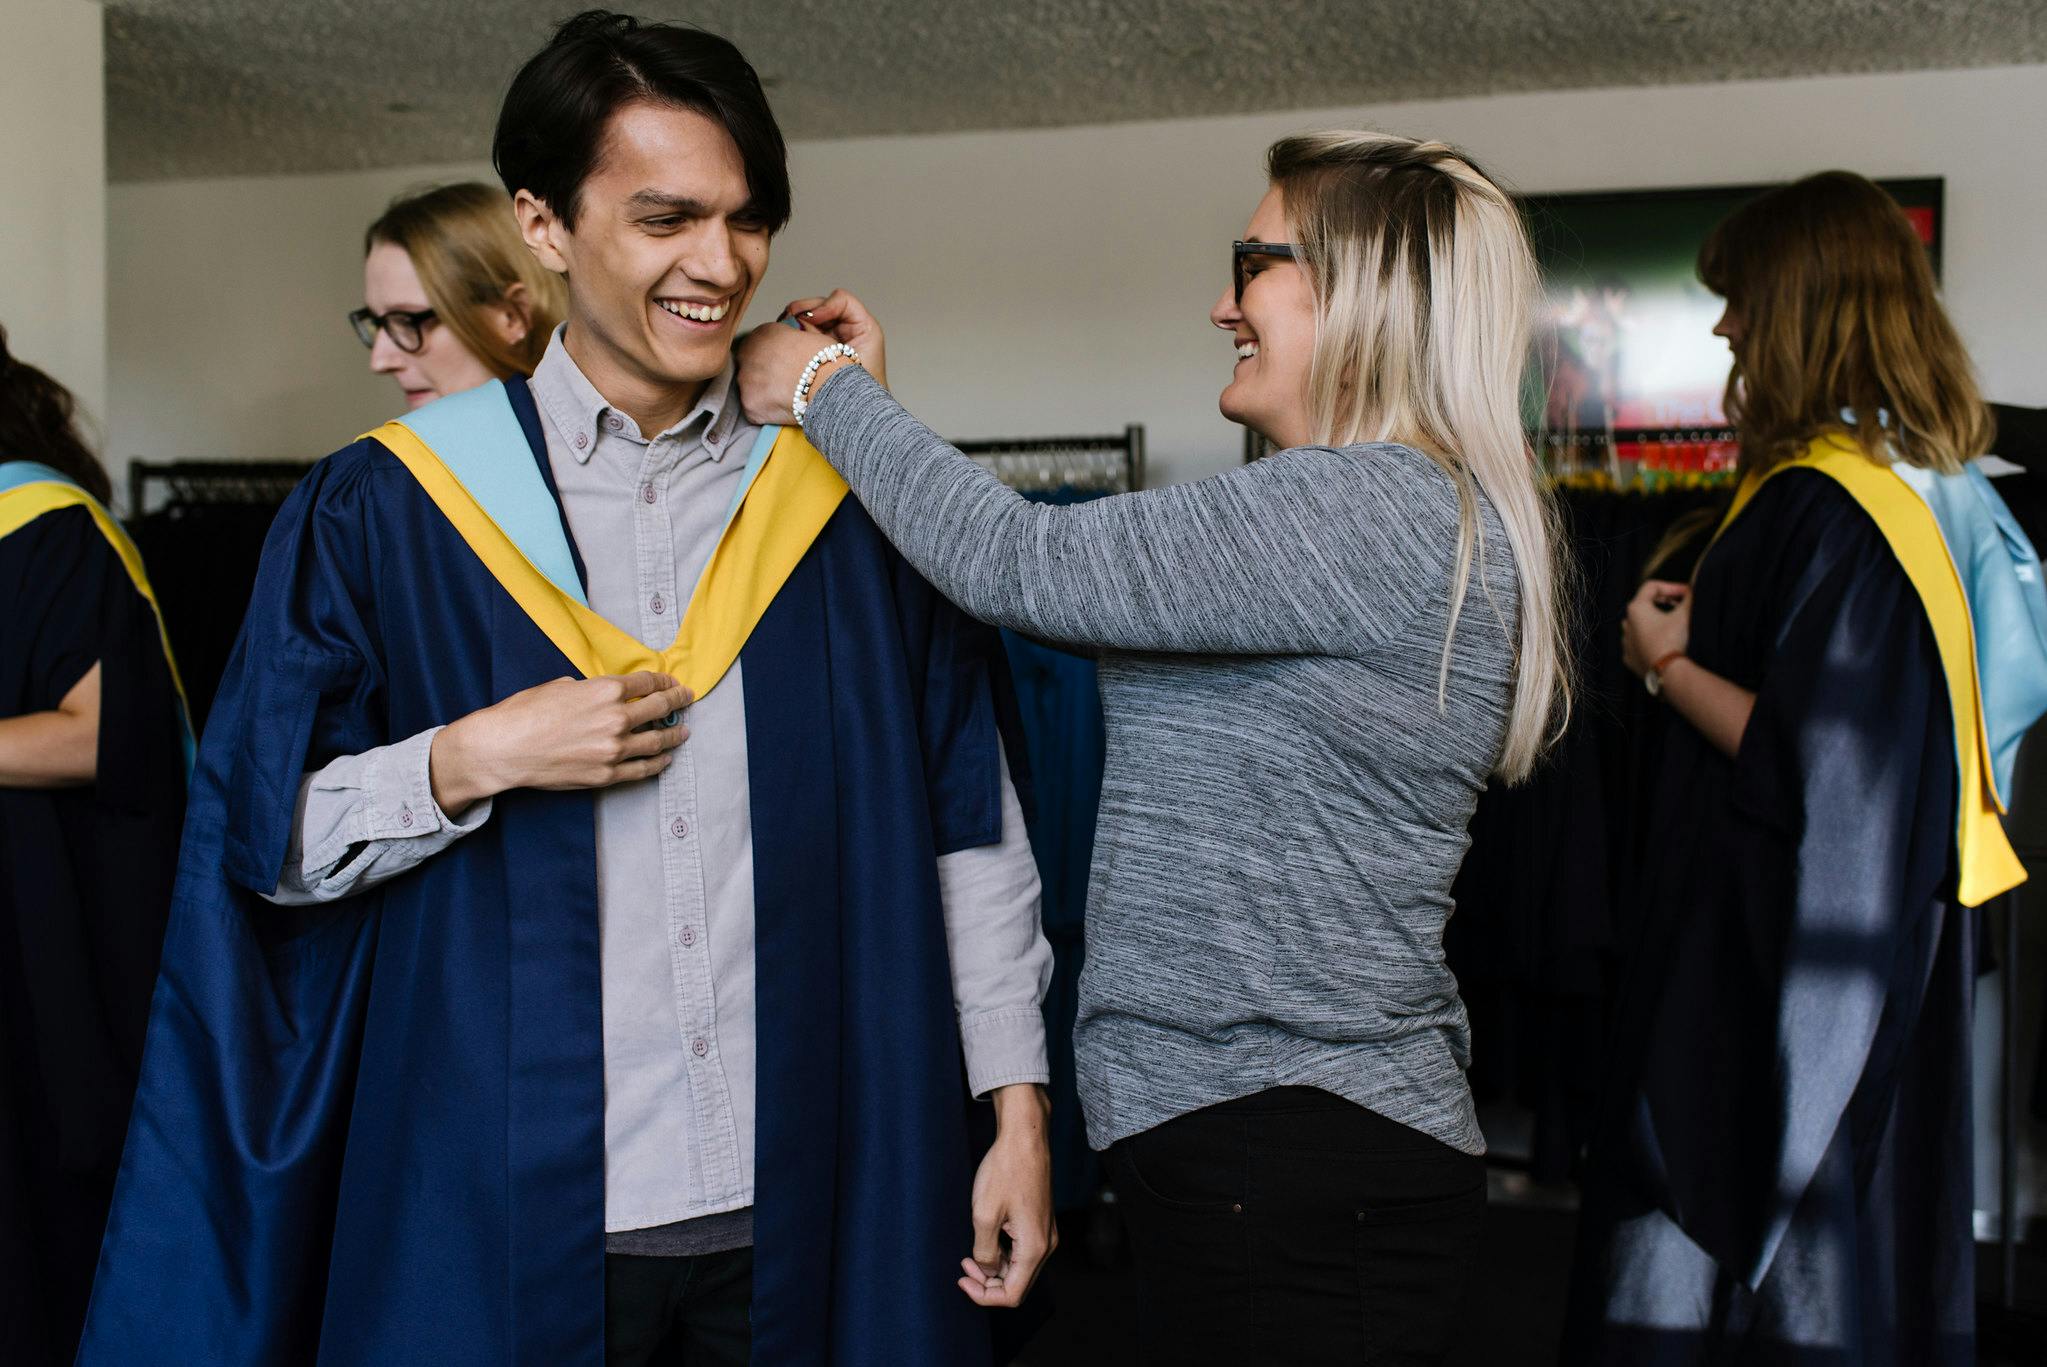 Plymouth College of Art Graduation Ceremony 2019 student robing